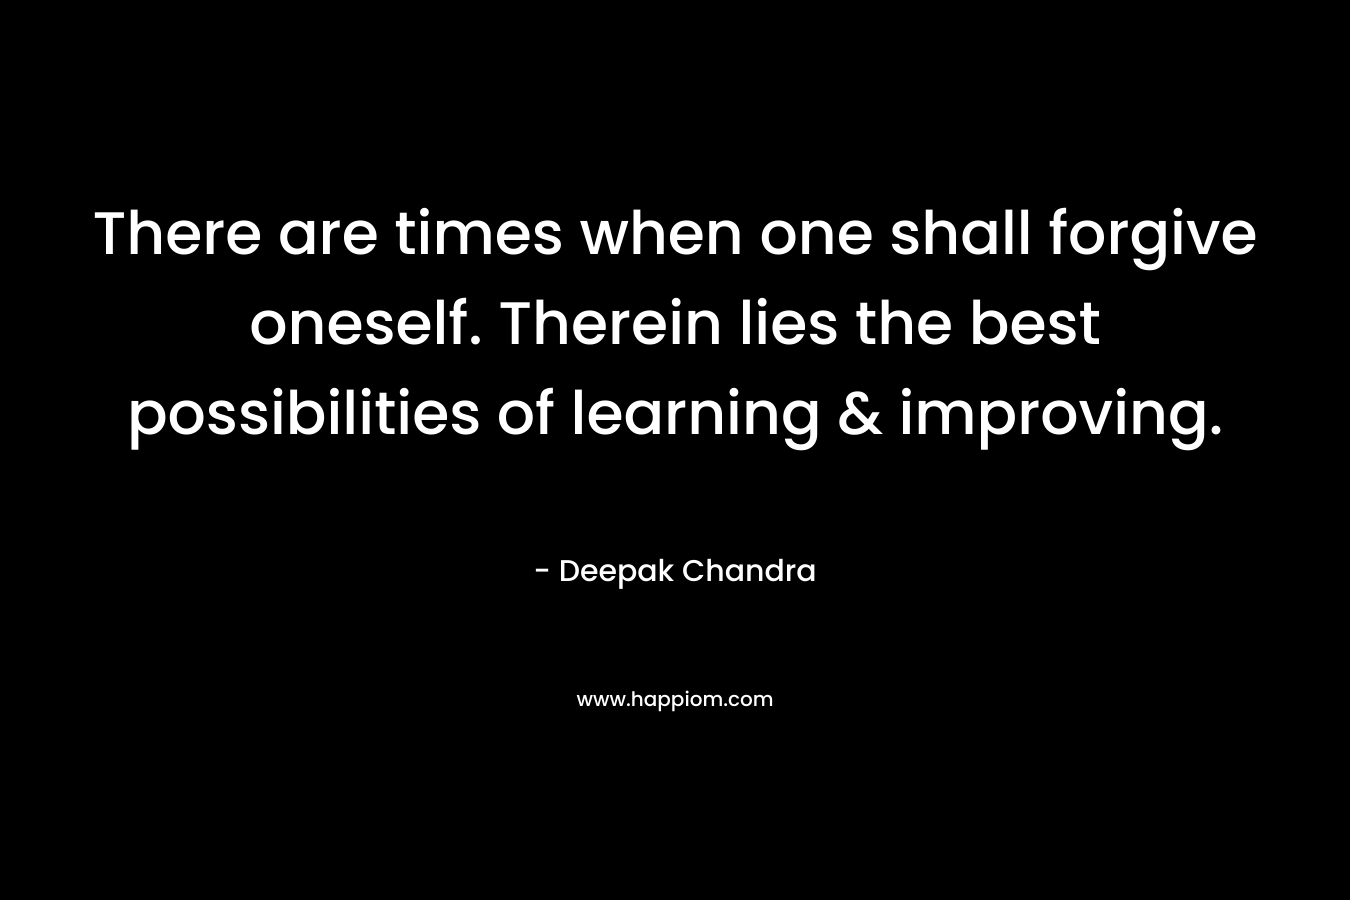 There are times when one shall forgive oneself. Therein lies the best possibilities of learning & improving. – Deepak Chandra